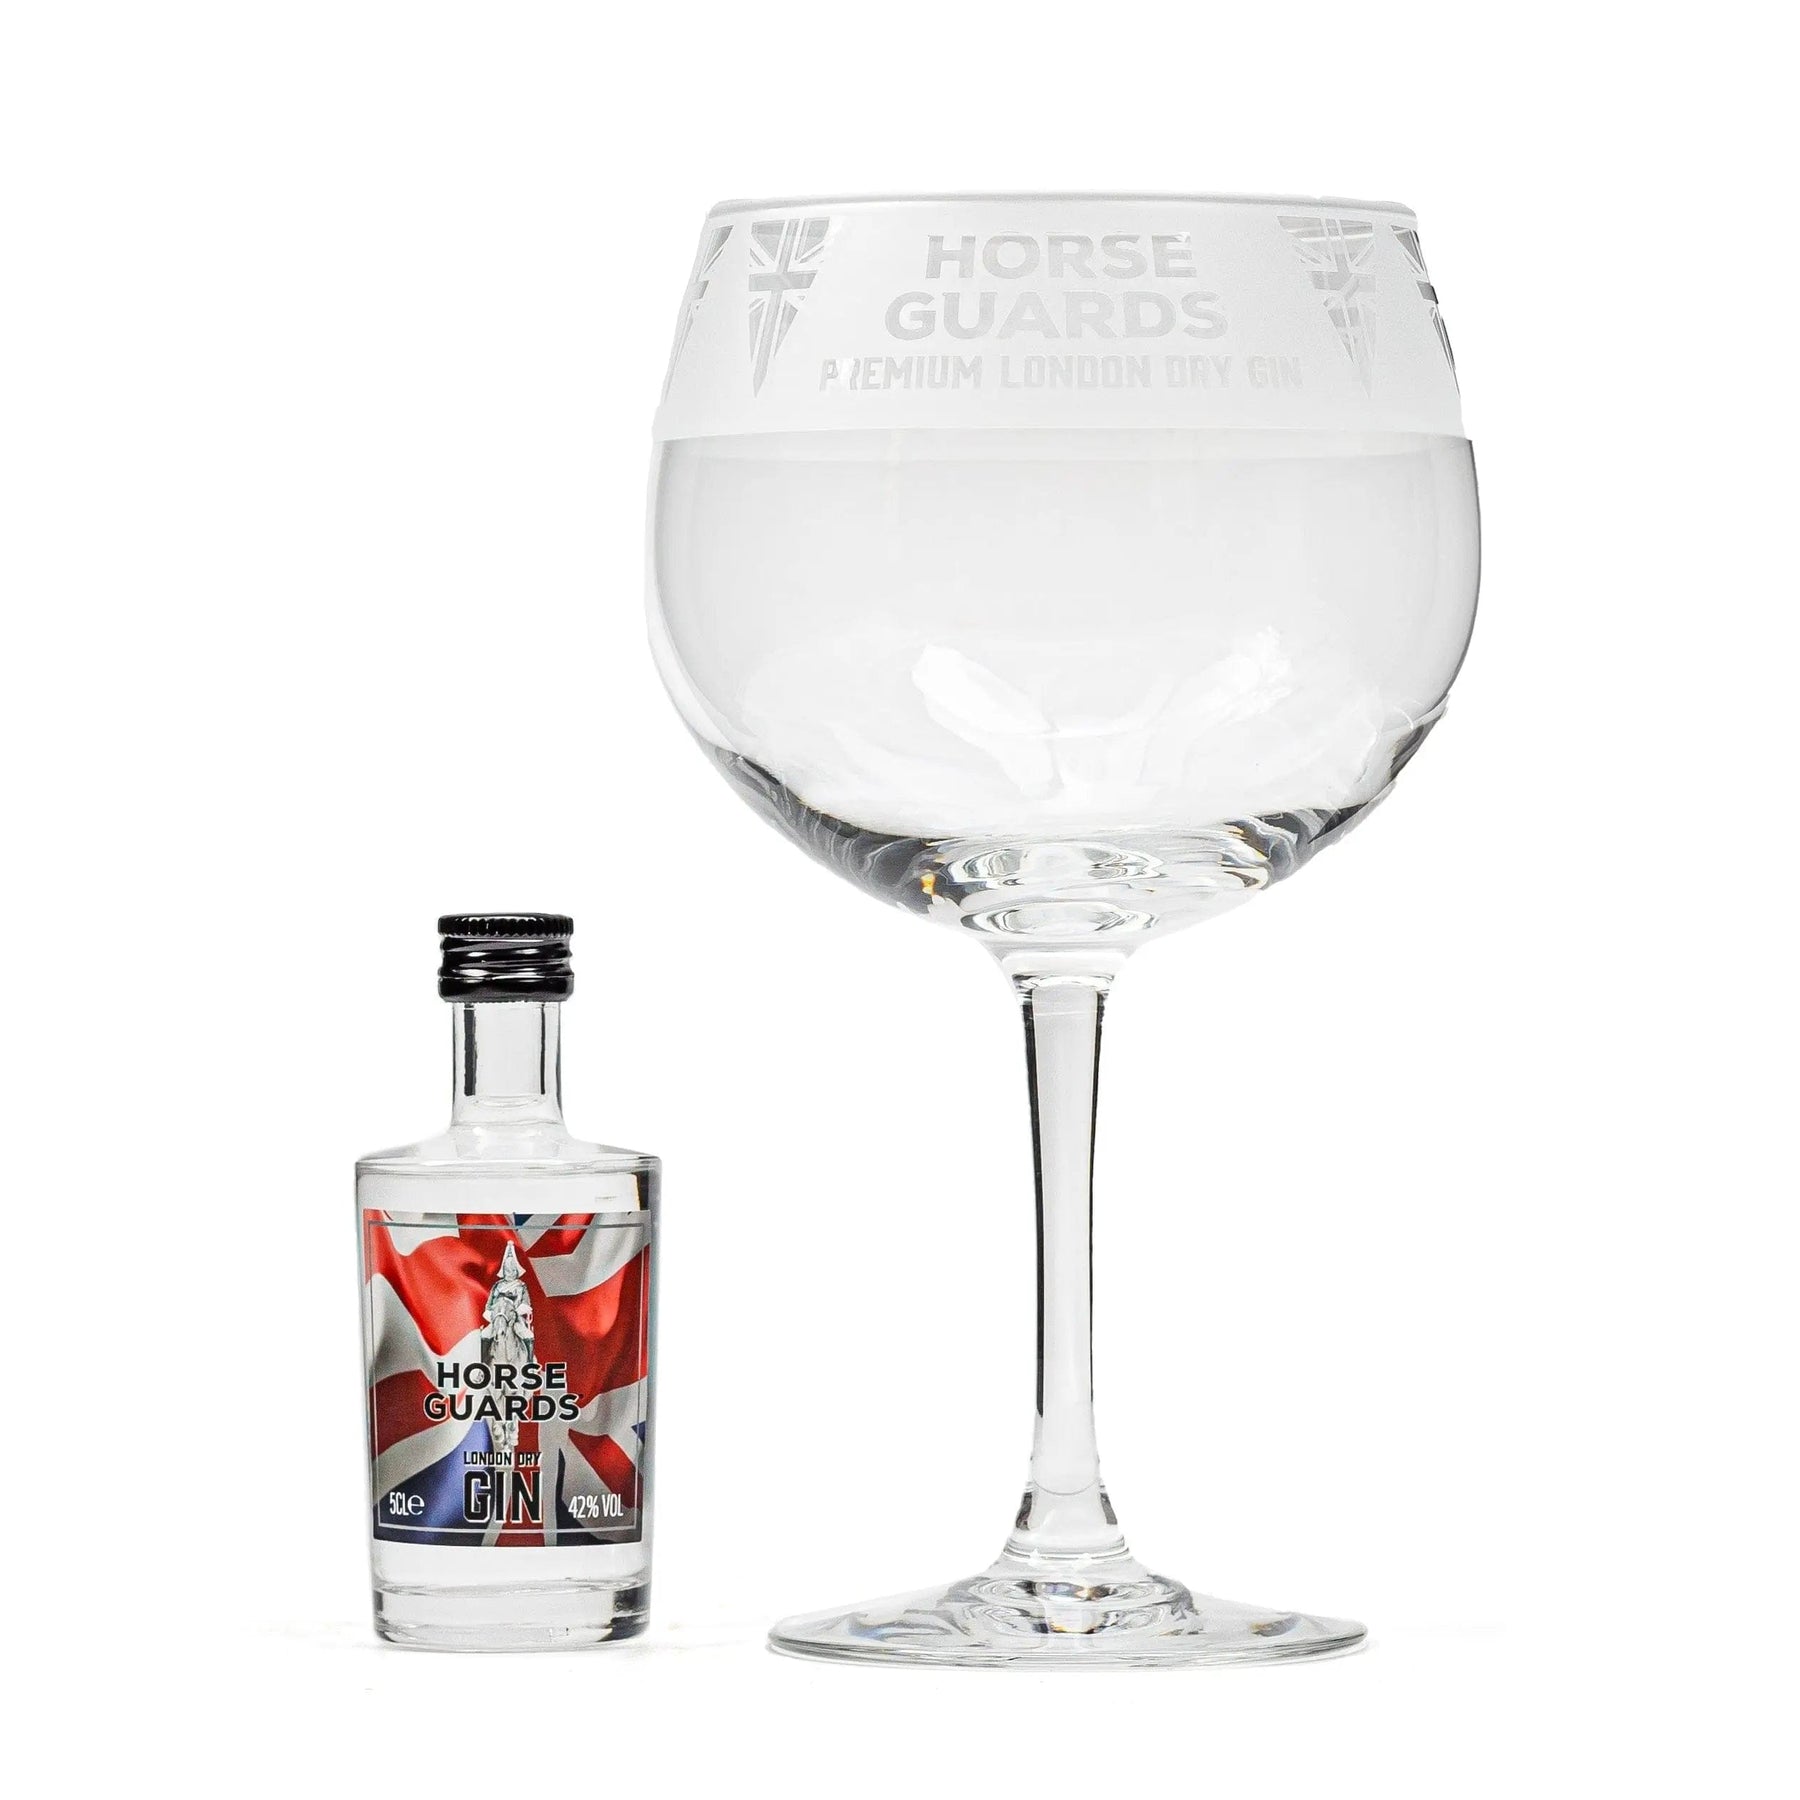 London Dry Gin Tipple Gift Set - Get a London Dry Gin miniature for FREE!